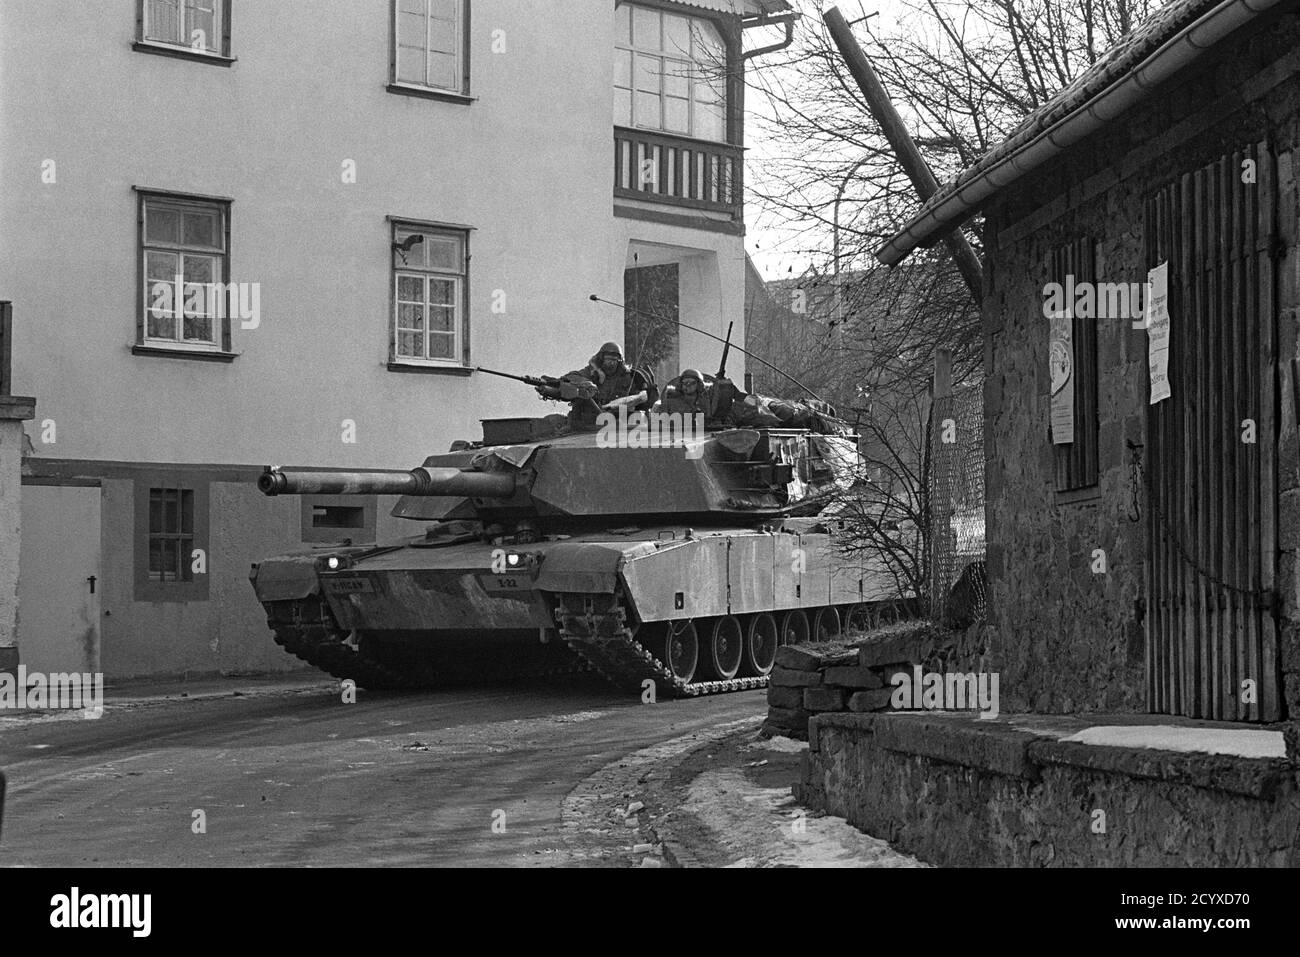 NATO exercises in Germany, M1 Abrams US Army tank in a village (January 1985) Stock Photo